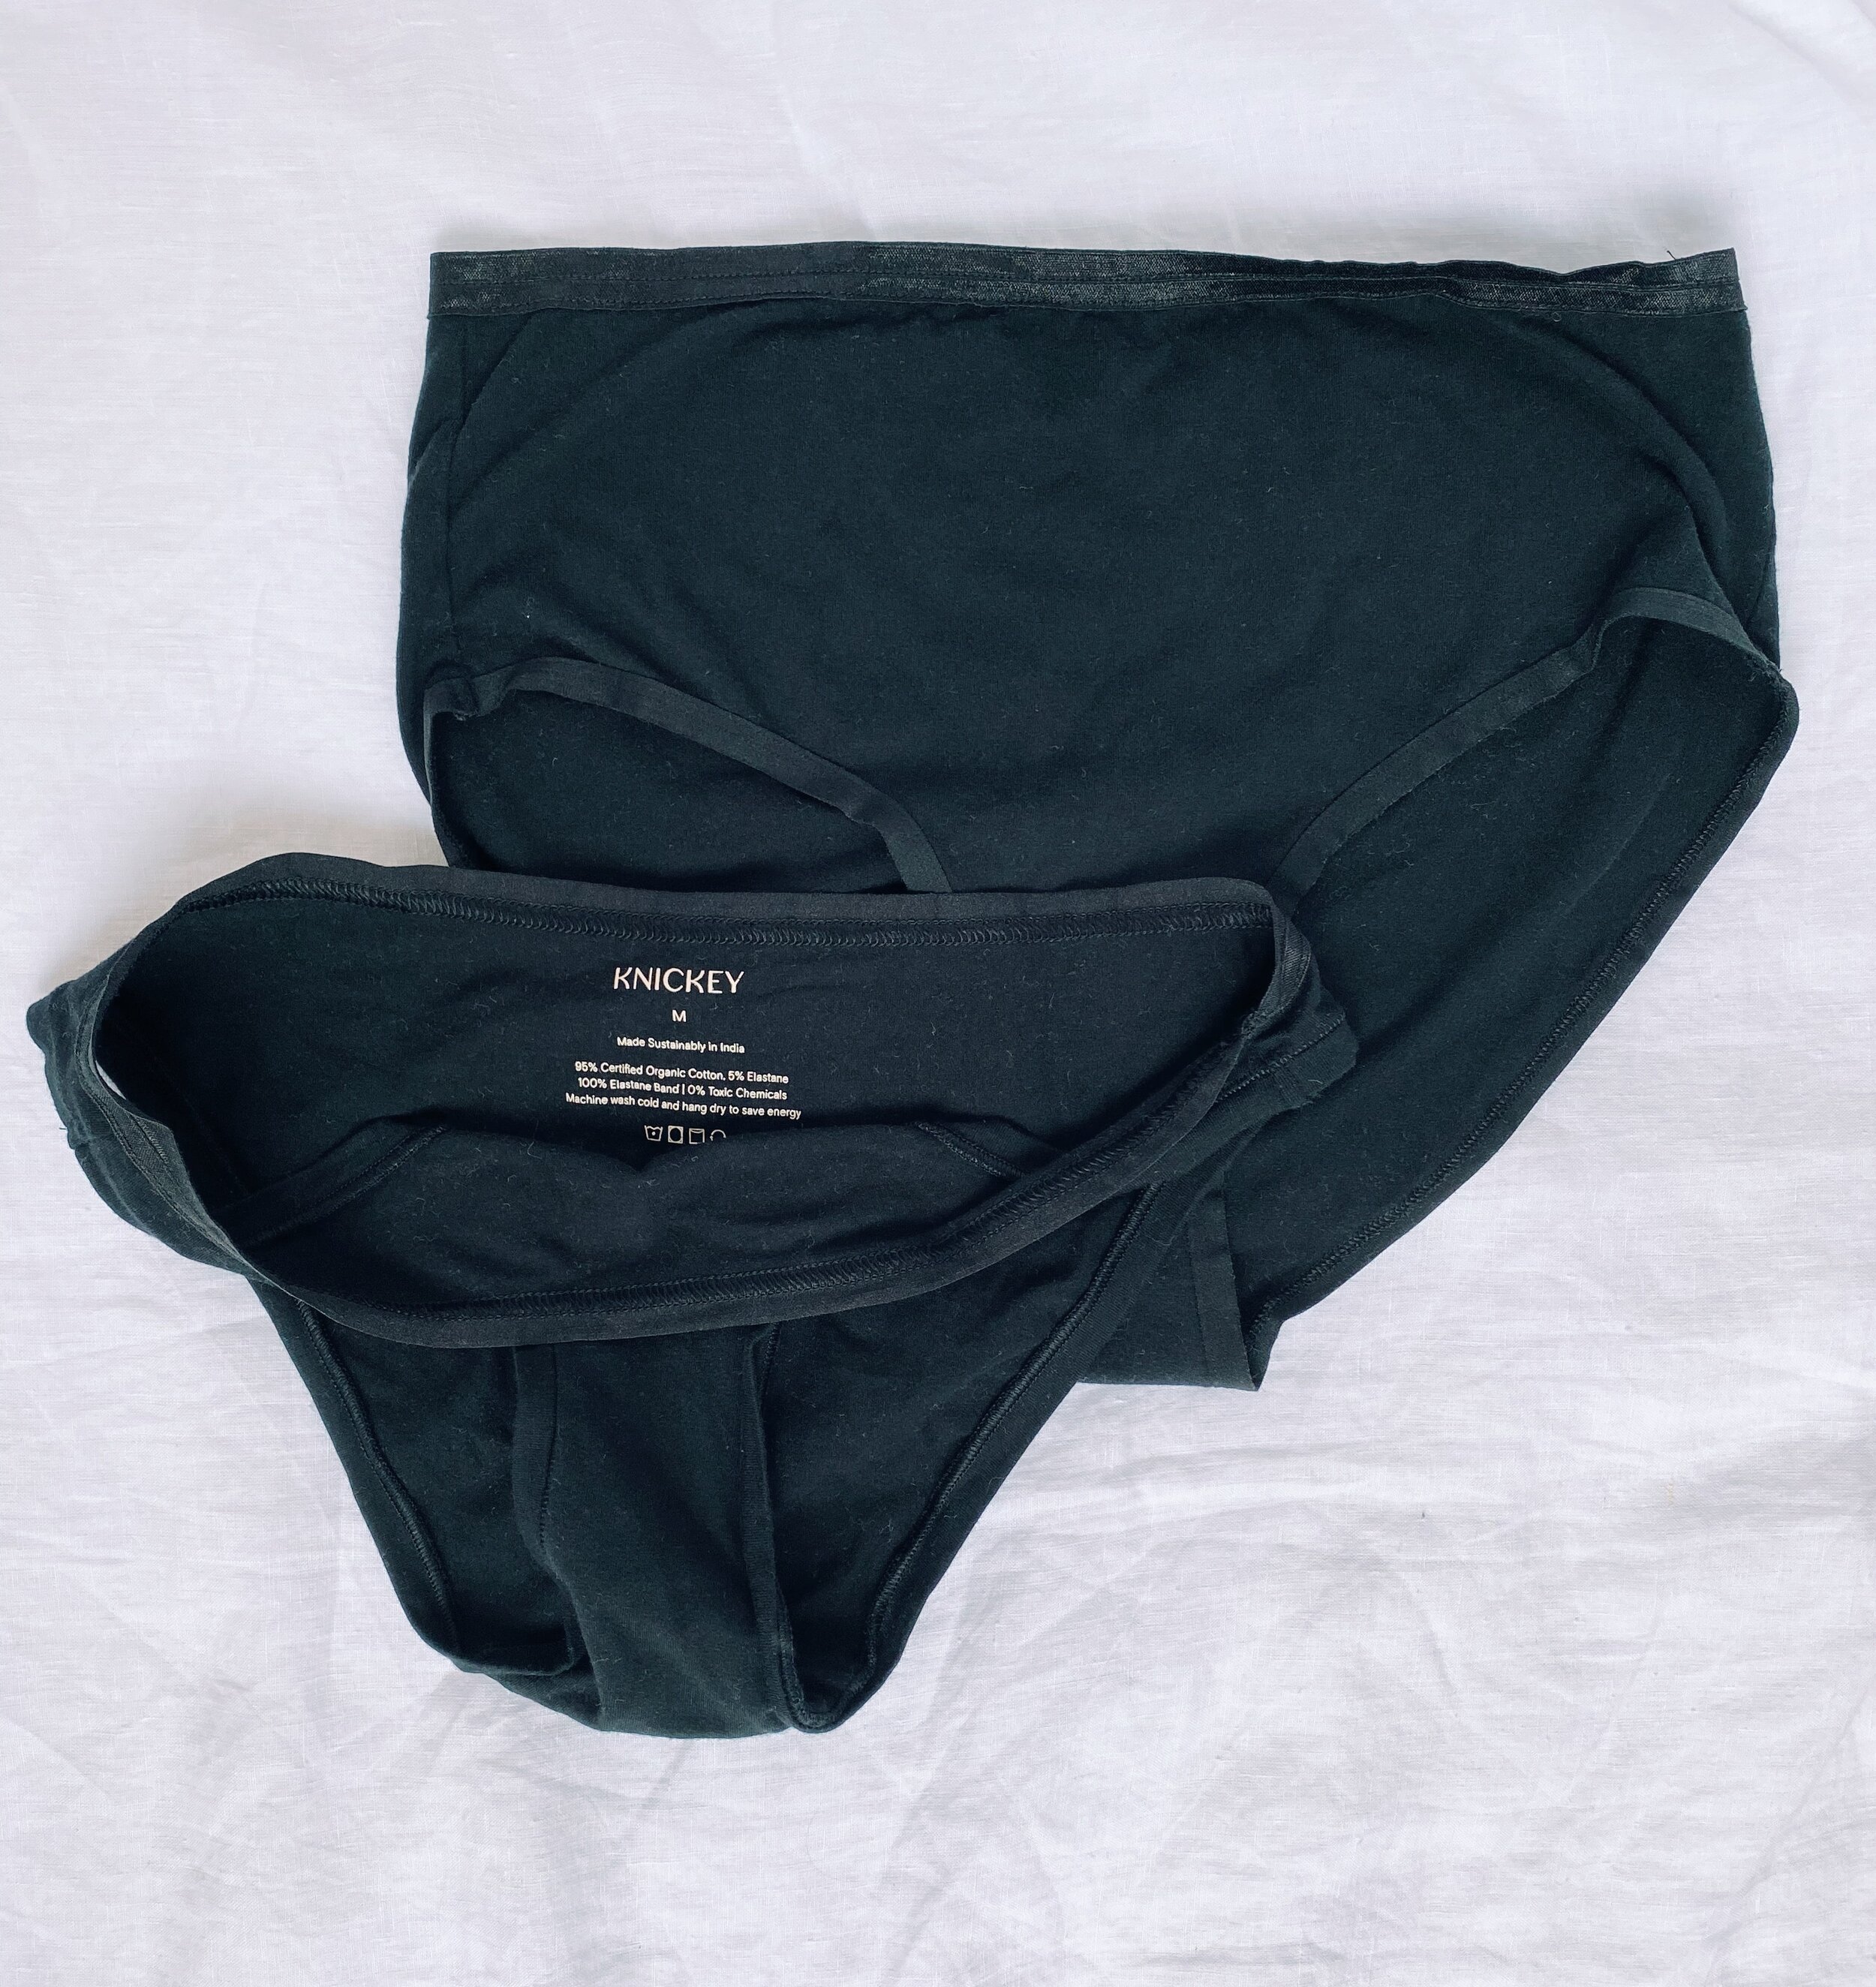 Knickey Underwear Review — Fairly Curated